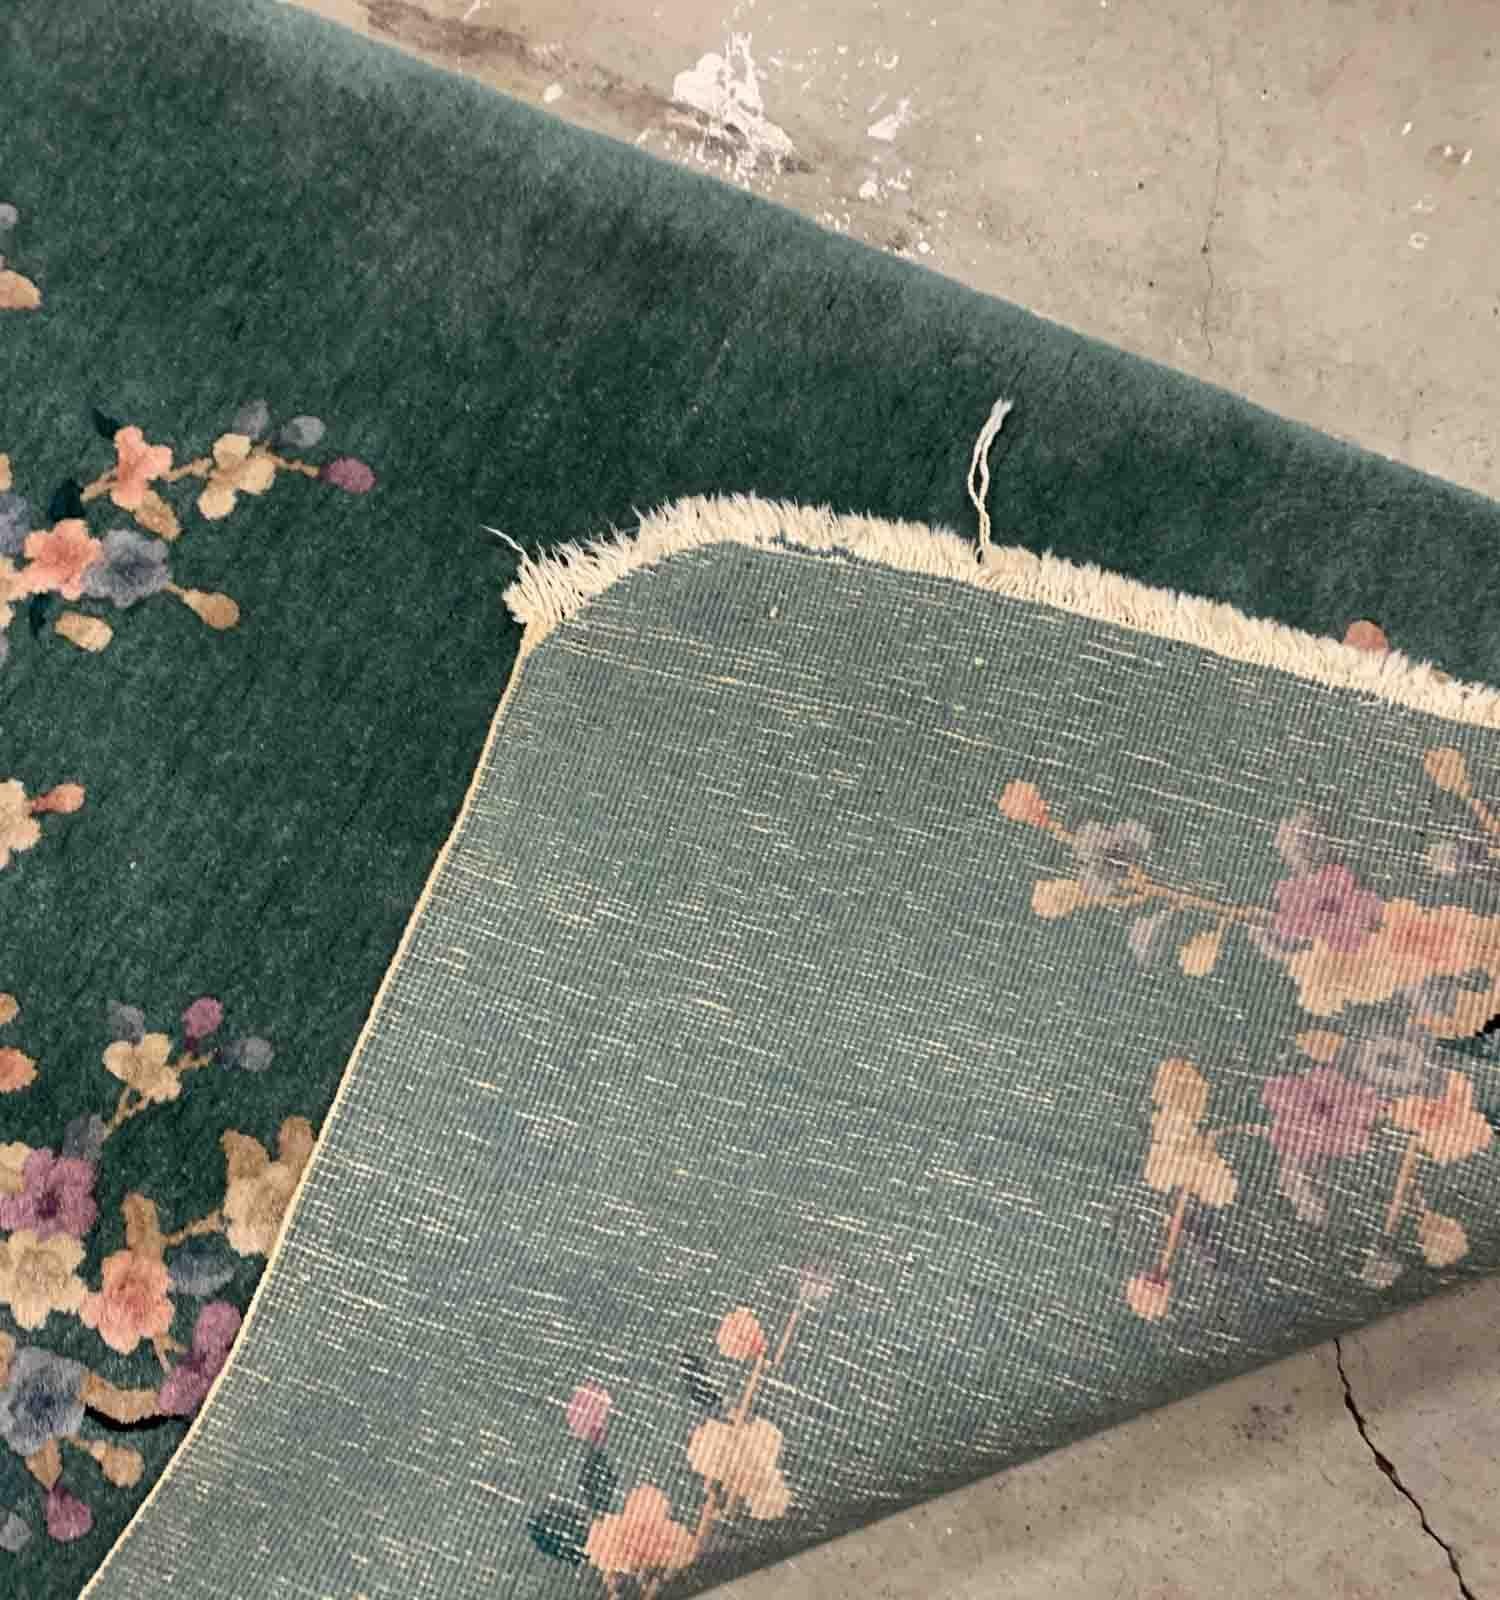 Handmade antique Art Deco Chinese rug in green shade with floral design. The rug is from the beginning of 20th century in original good condition. 

-condition: original good, 

-circa: 1920s,

-size: 3.1' x 4.10' (94cm x